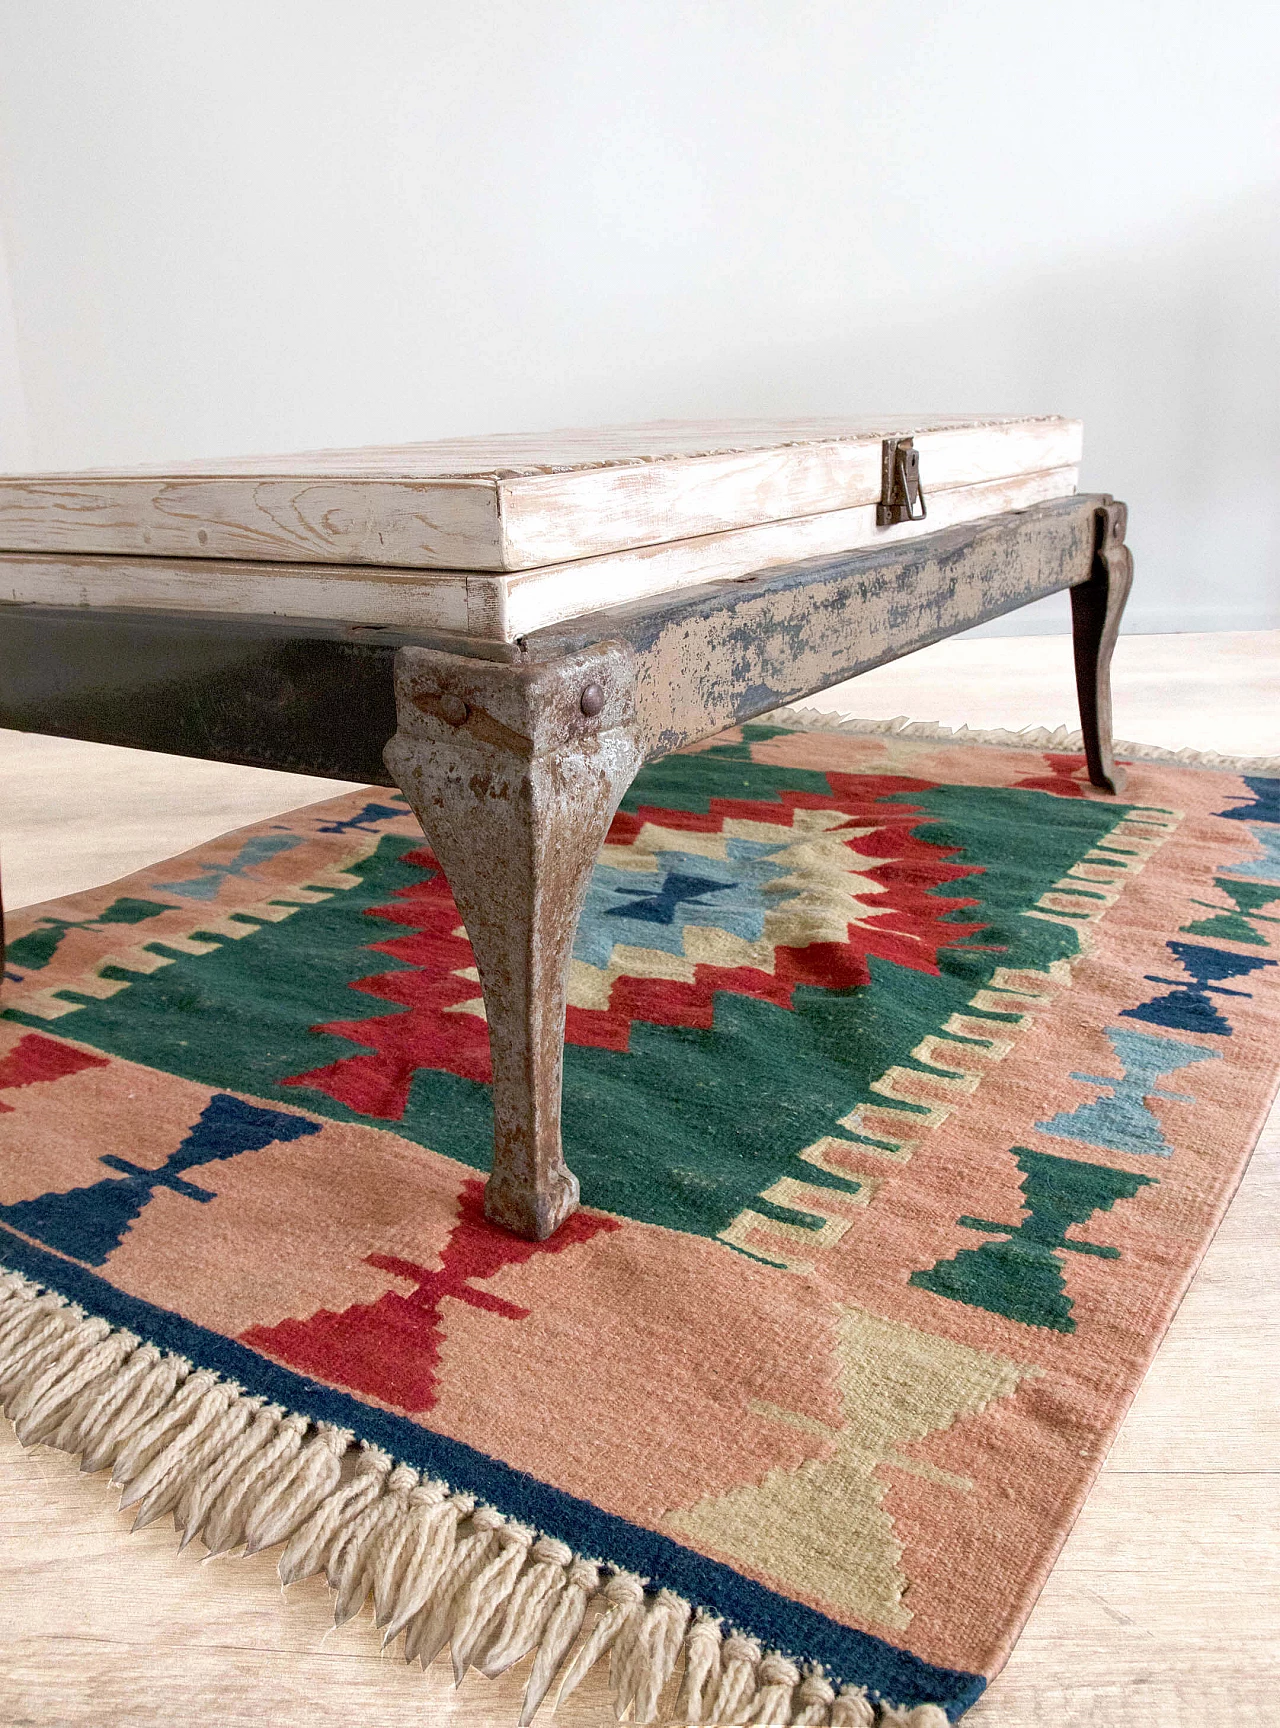 A Small Table With Textile To The Inside 1087018